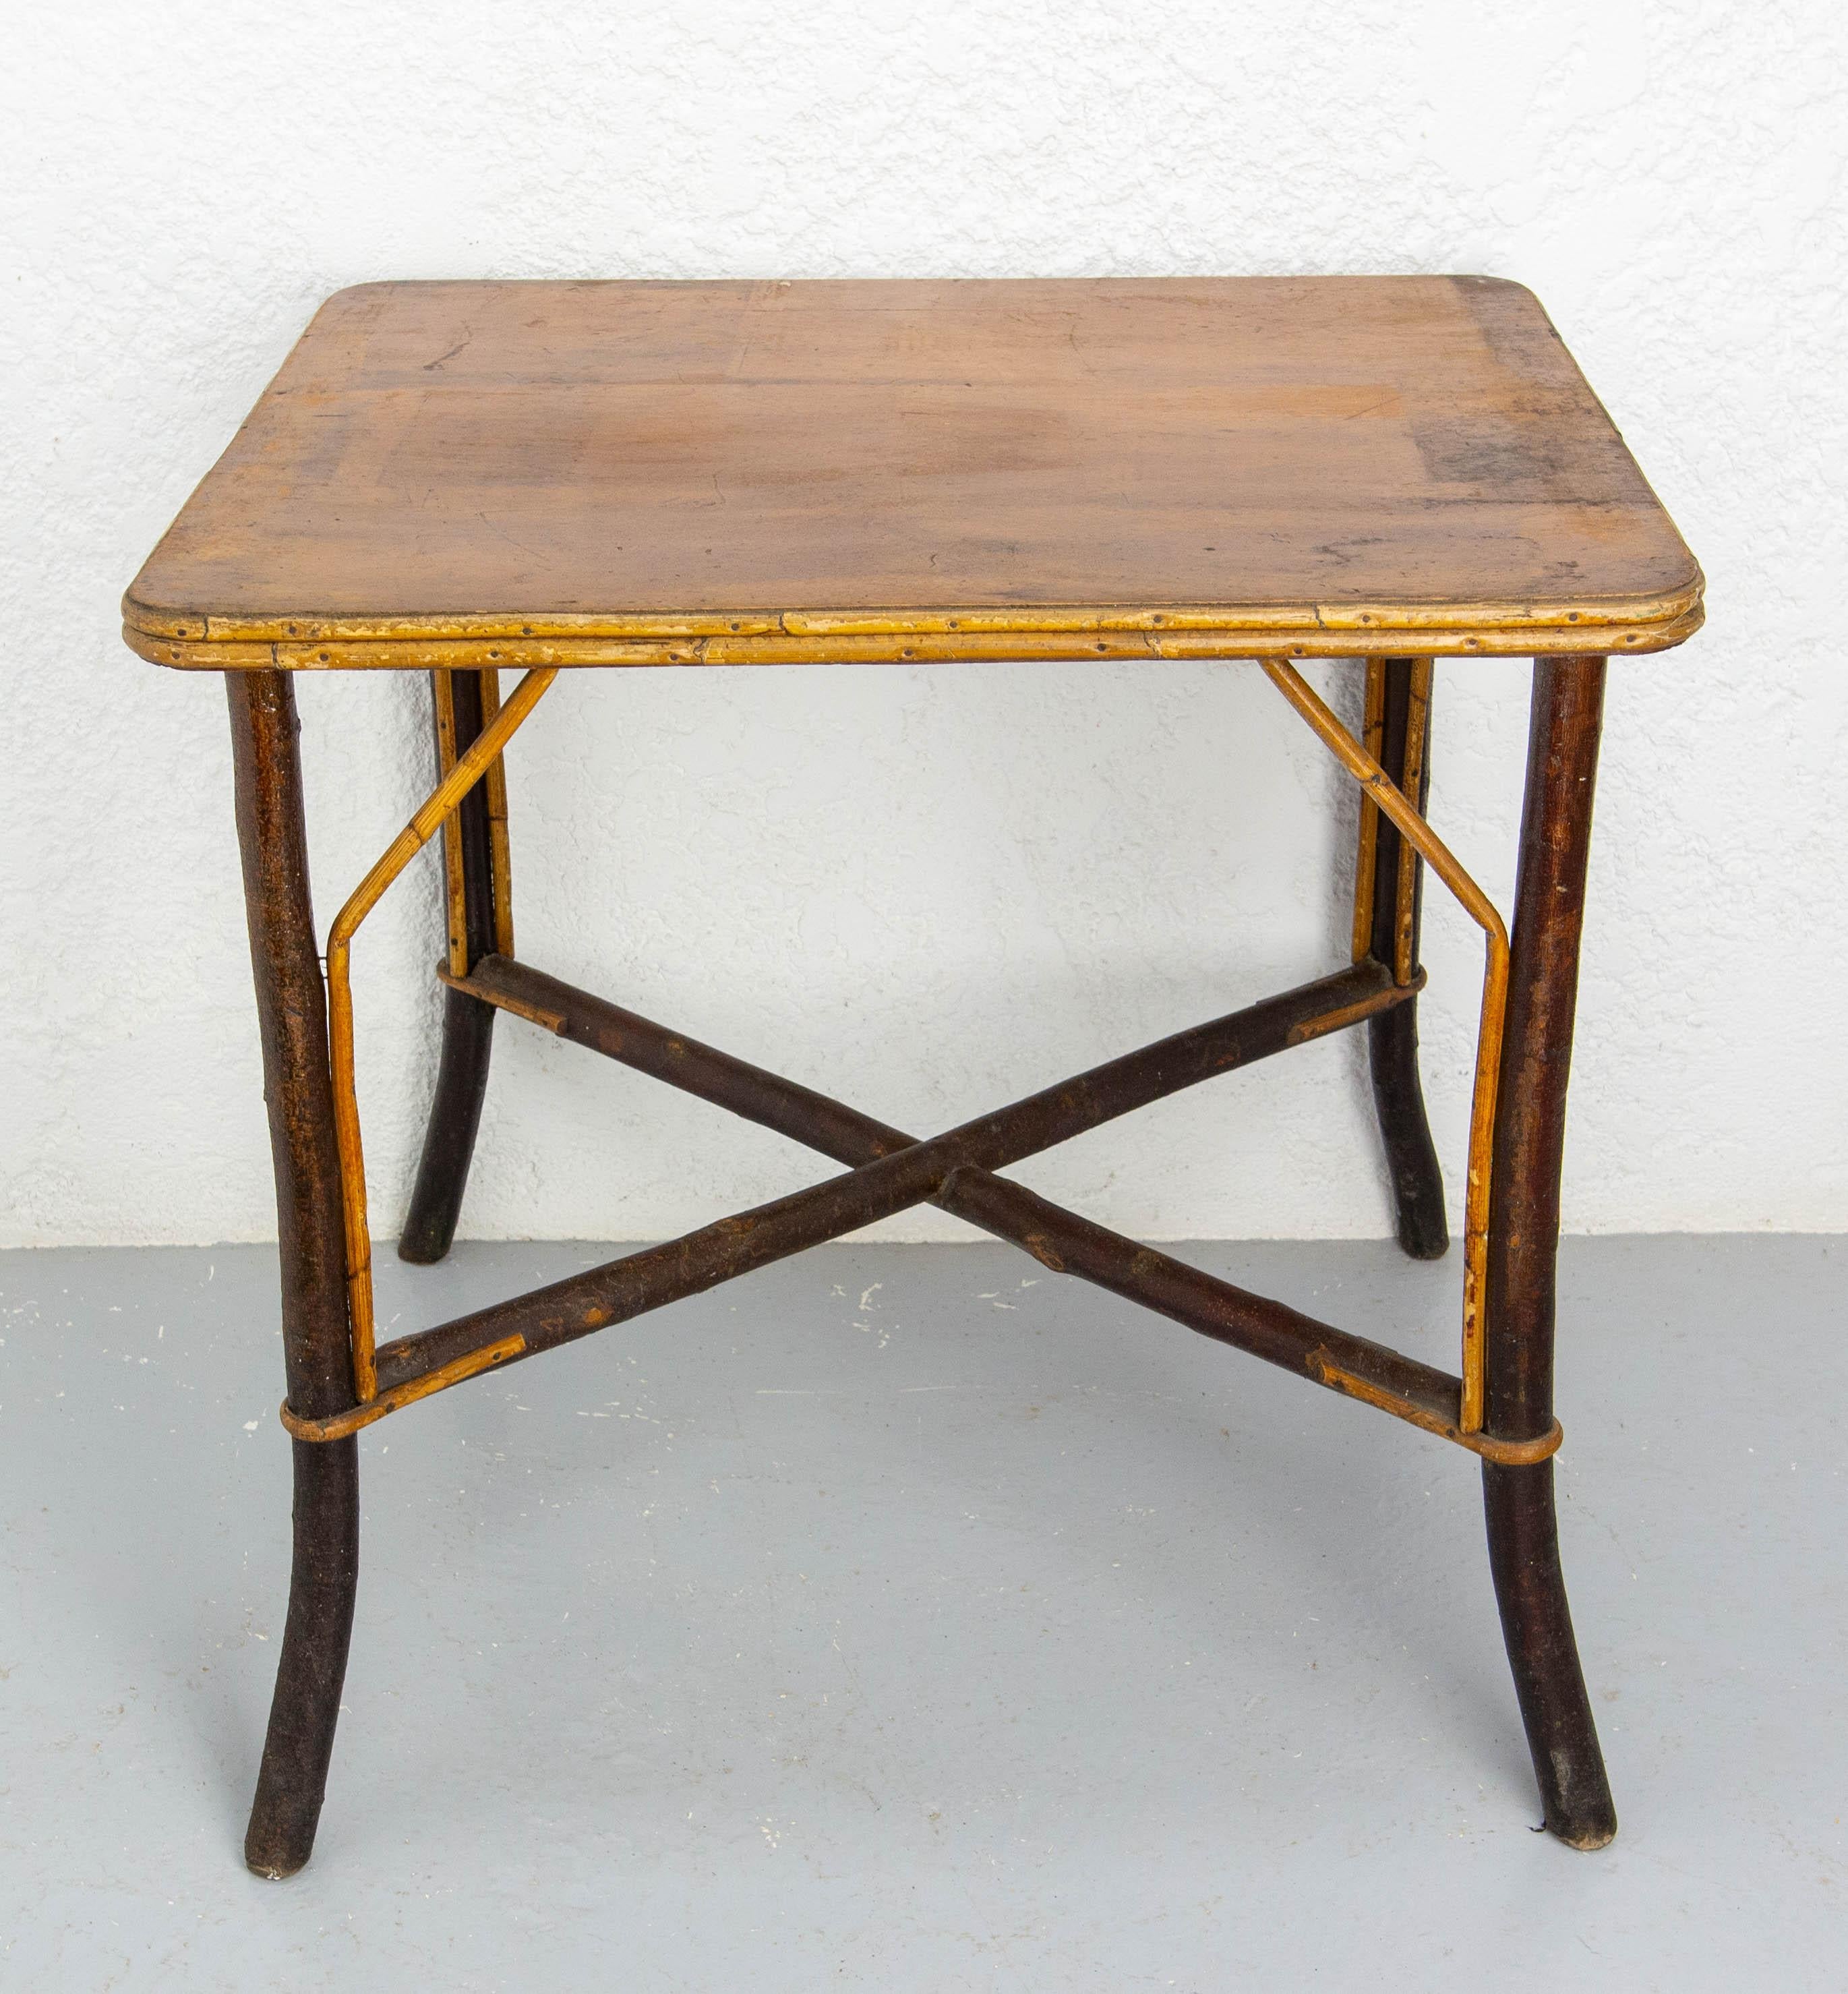 Rare side table with feet in hazel wood and rattan. The cabinetmaker has kept the bark of the wood for making the feet.
Dimensions of the table top: 23.22 x 27.95 in. (59 x 71 cm)
Early 20th century, France

Shipping:
71 / 65 / 73 cm 5 kg.
  